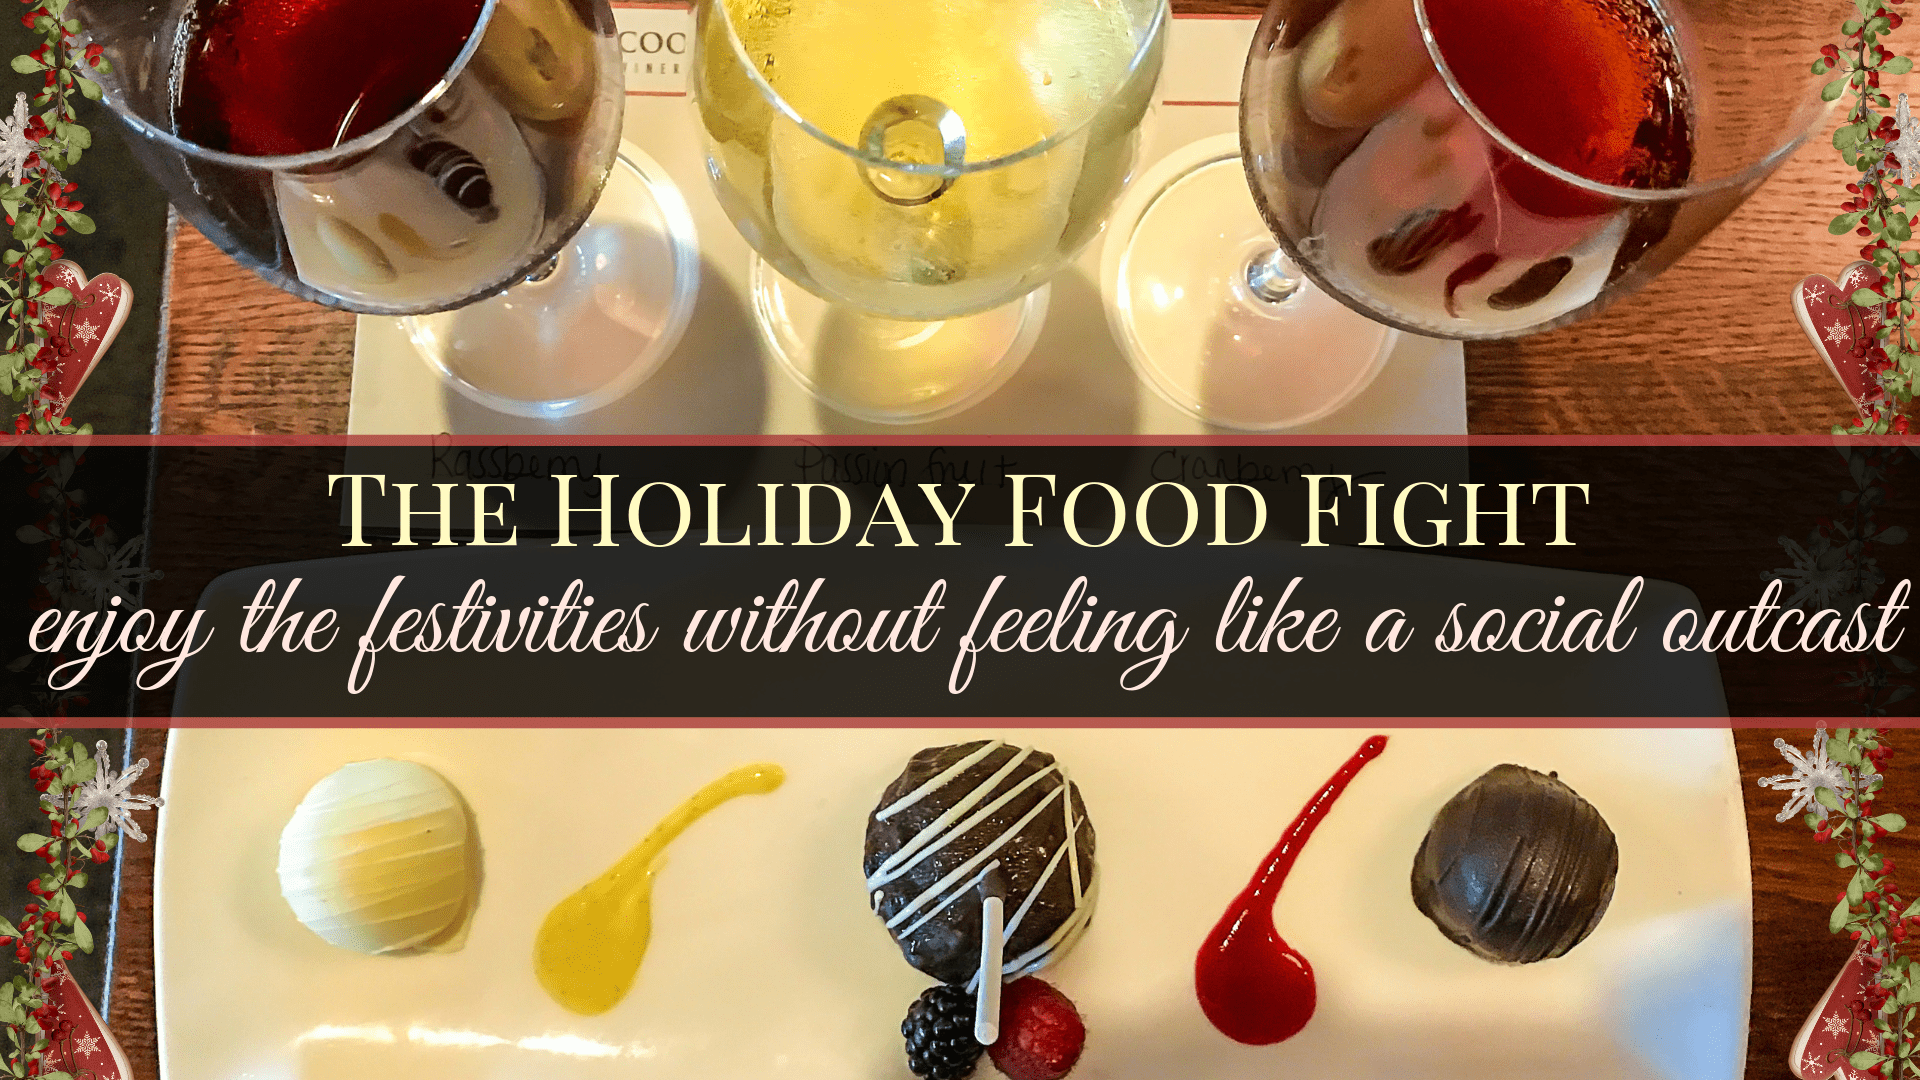 The Holiday Food Fight -Take Charge of Your Food